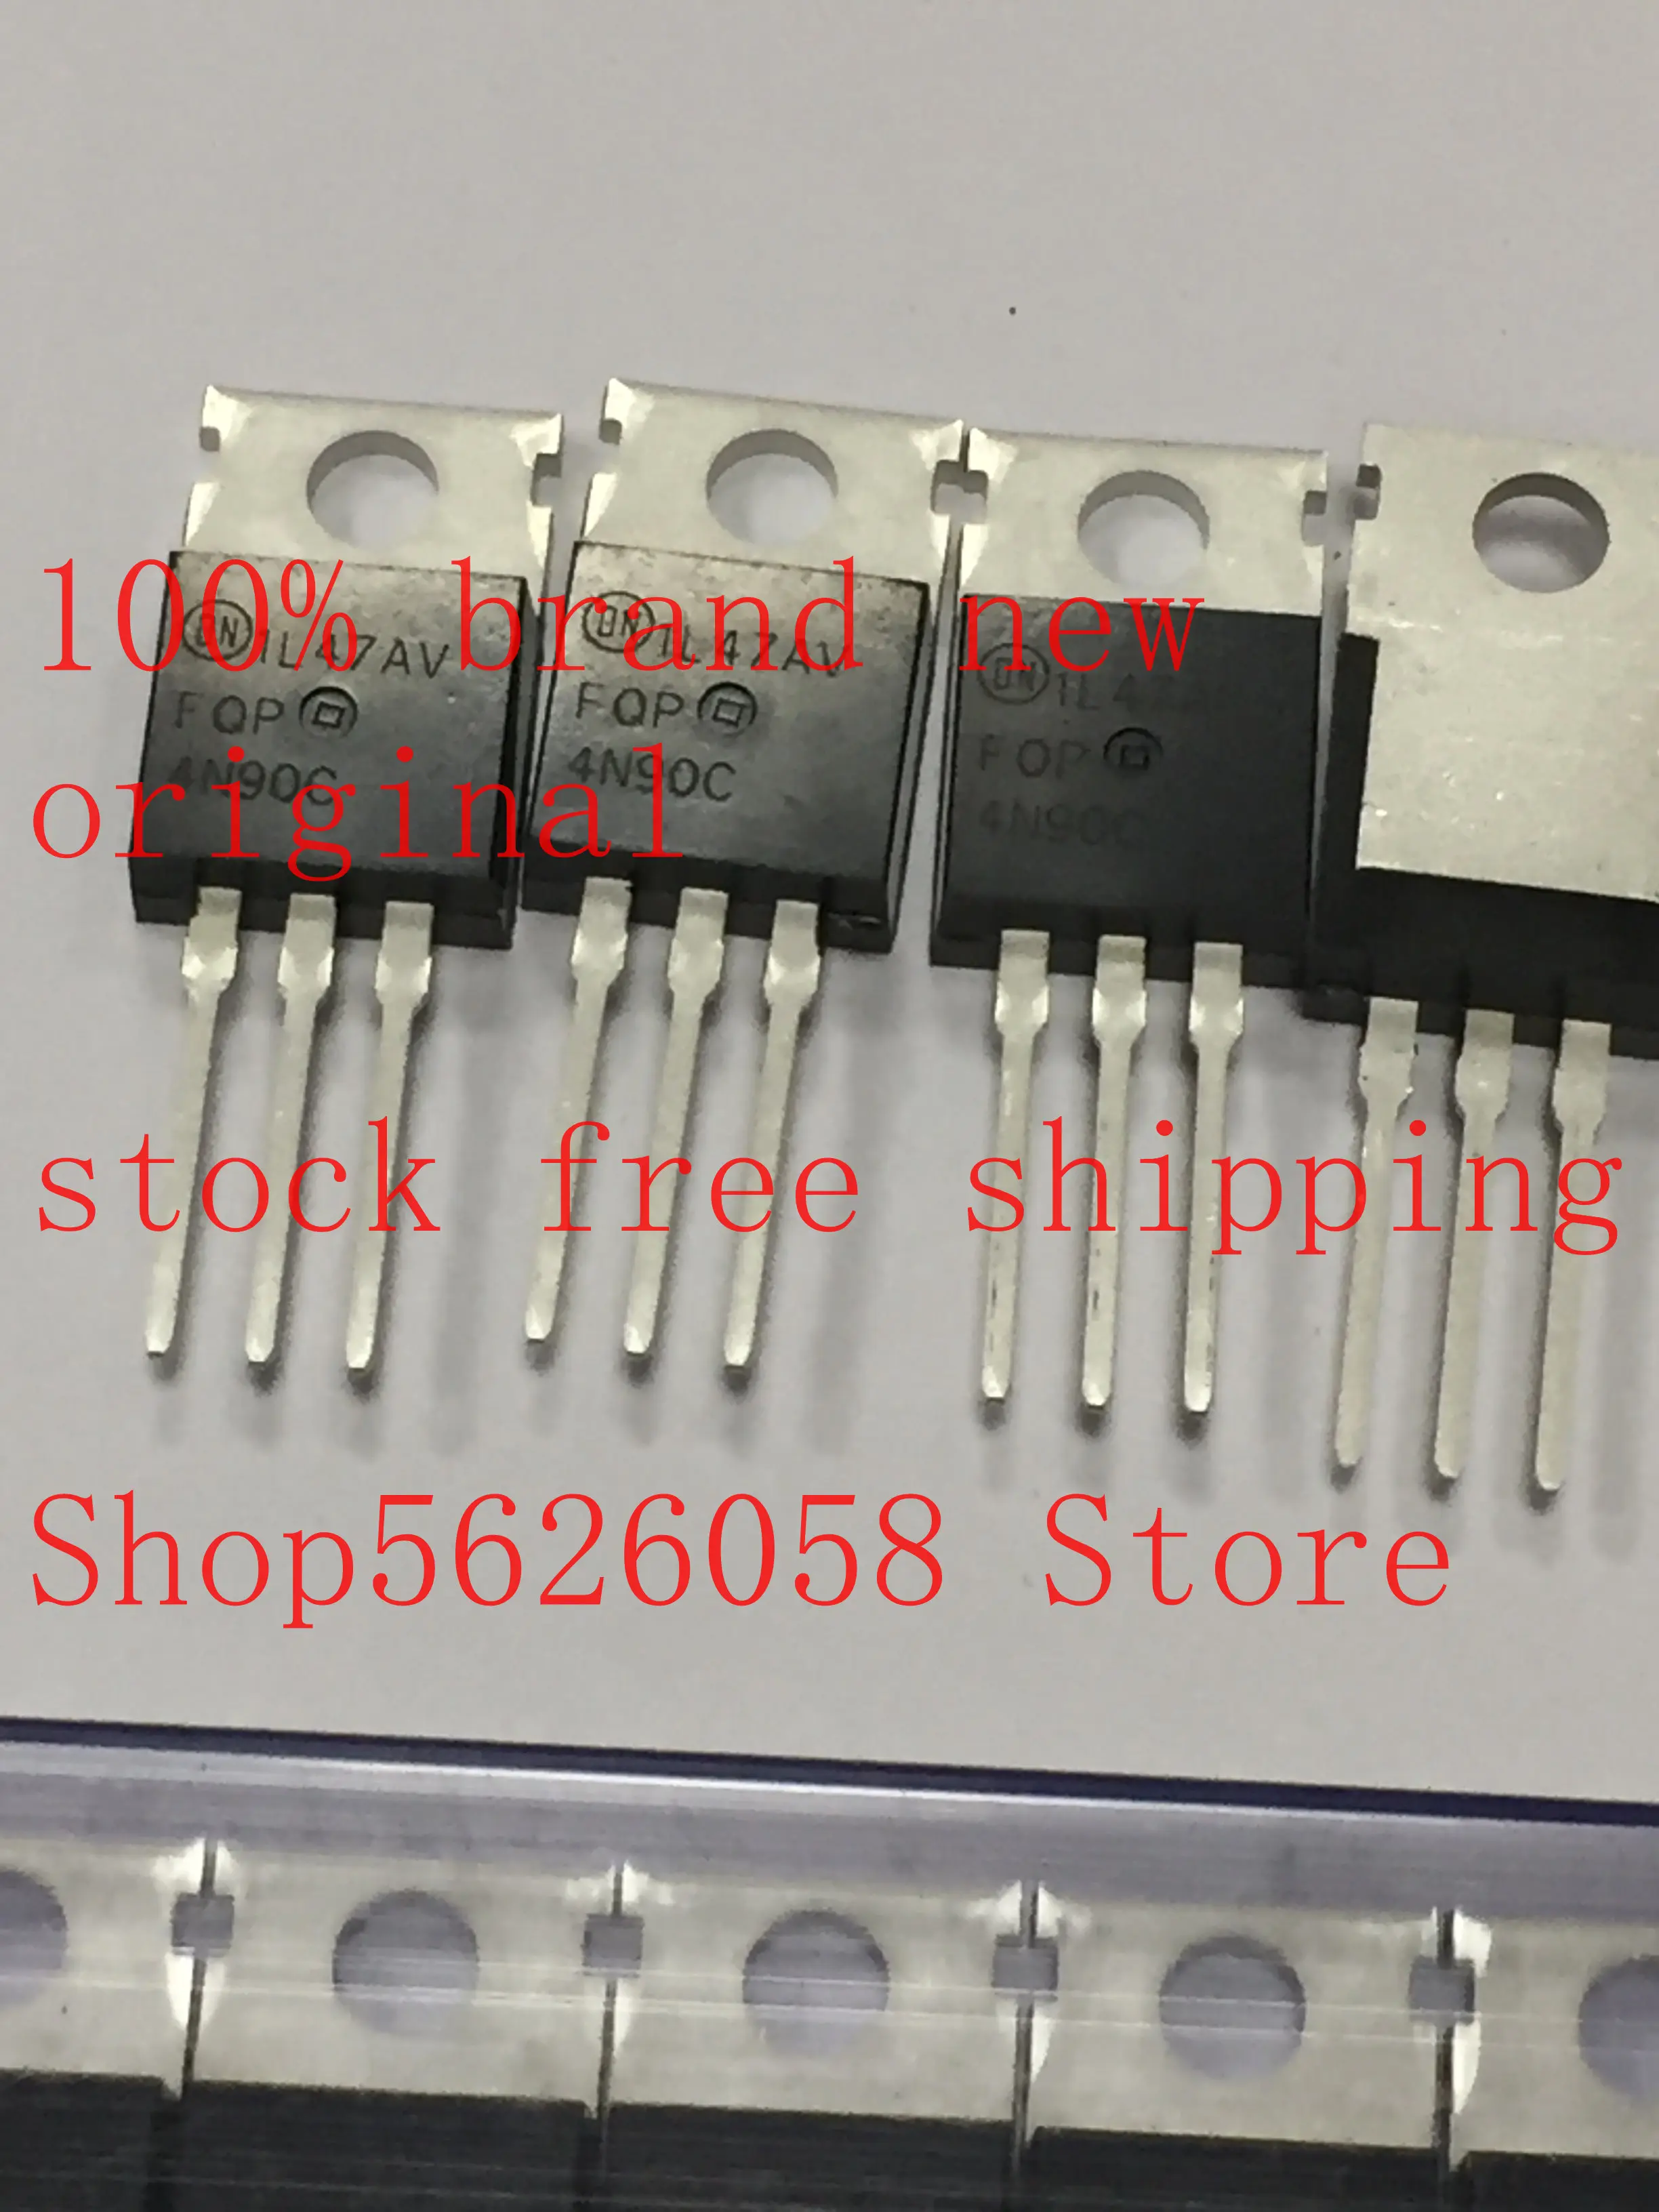 

10PCS/LOT FQP4N90C 4N90C TO220 TO-220 100% brand new in stock